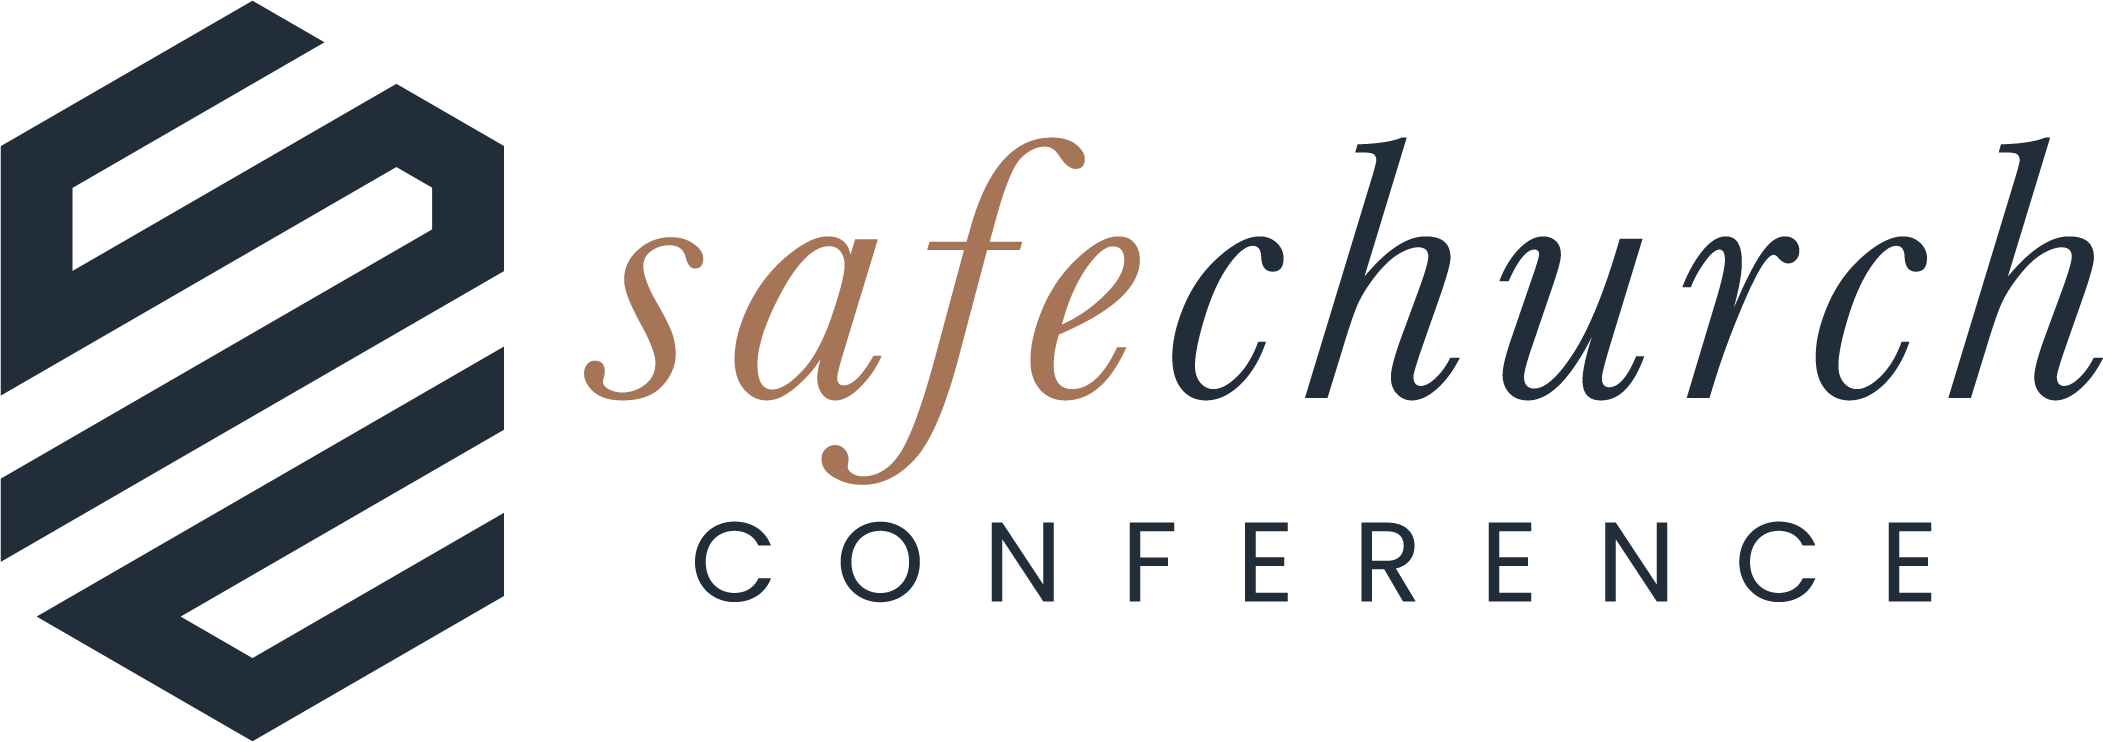 Safe Church Conference